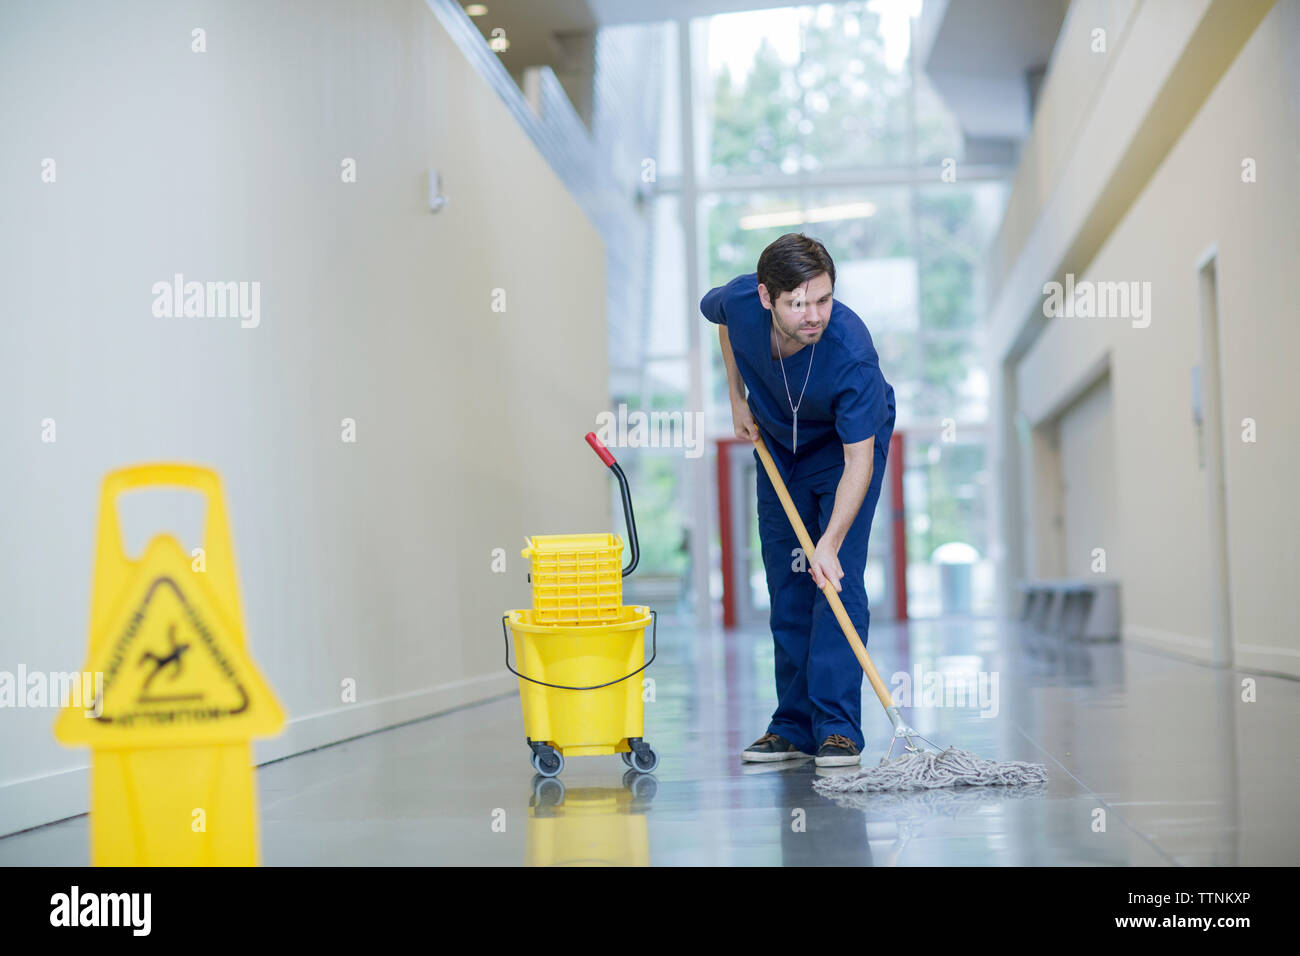 Male worker cleaning floor at hospital corridor Stock Photo